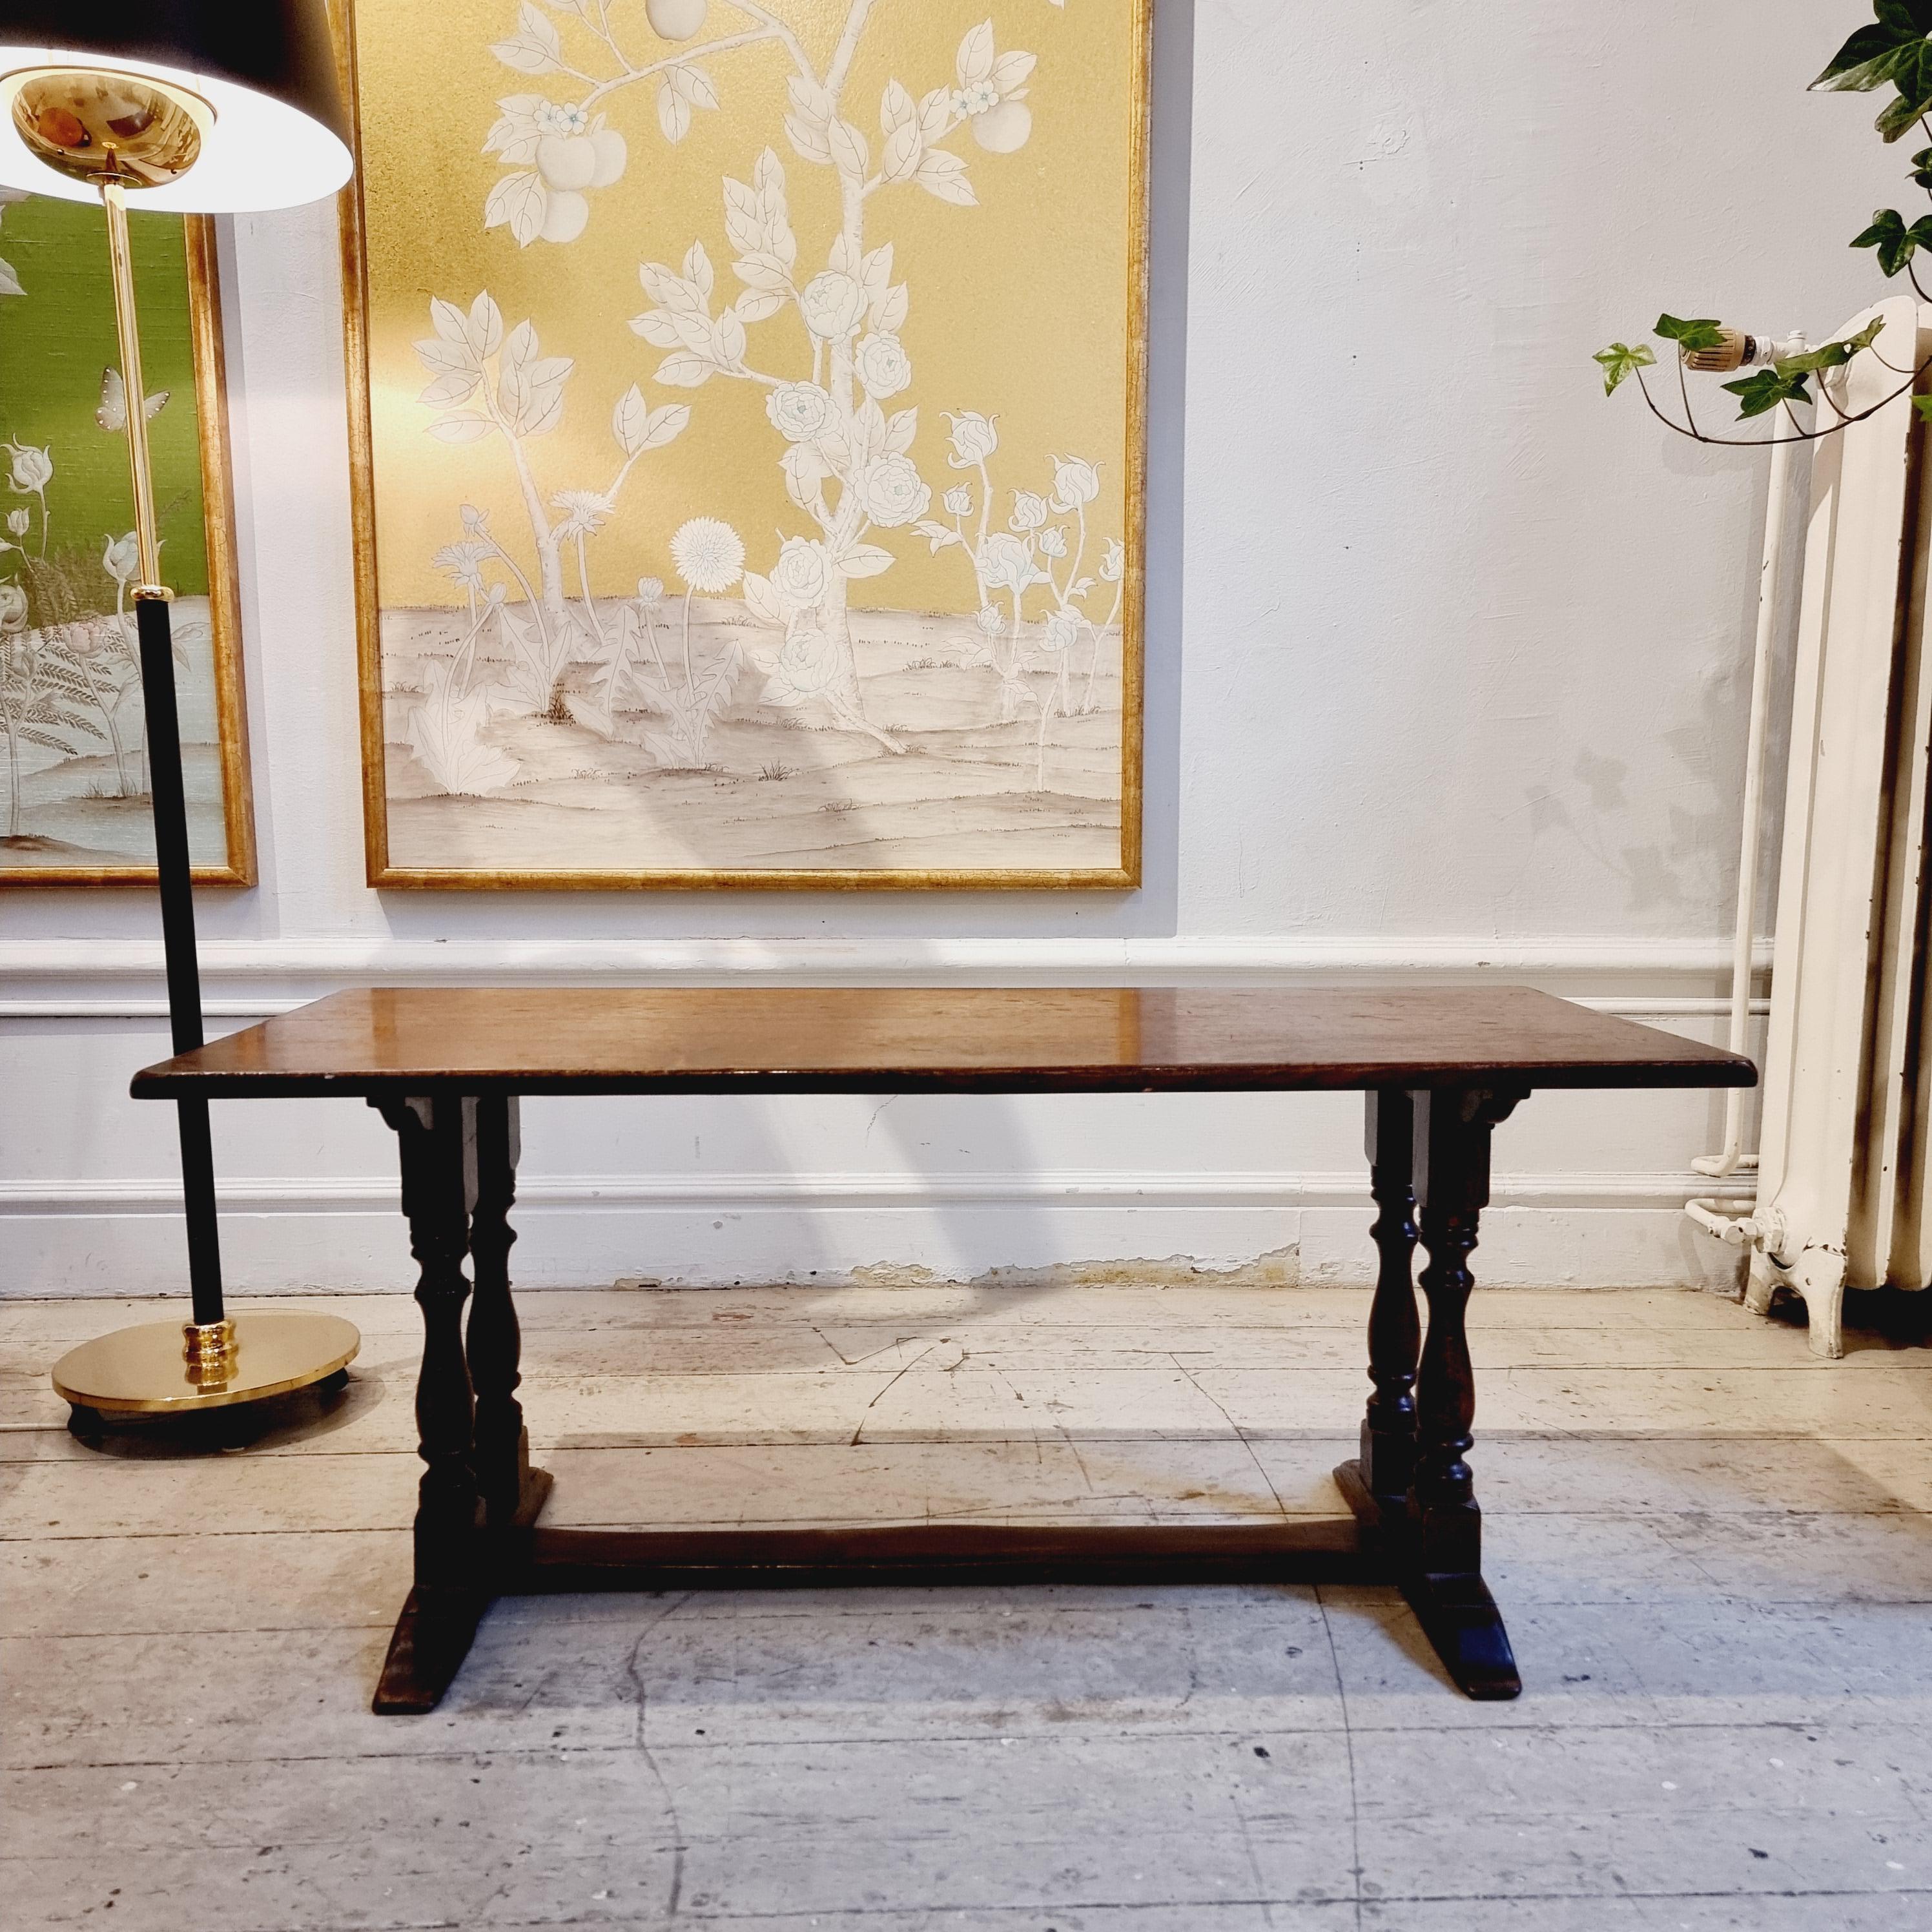 A beautiful stained wood coffee table in baroque style, made in England for Swedish luxury warehouse Nordiska Kompaniet / NK, Stockholm. Mid-1900s, labeled. 

Normal signs of age and wear, nice patina.